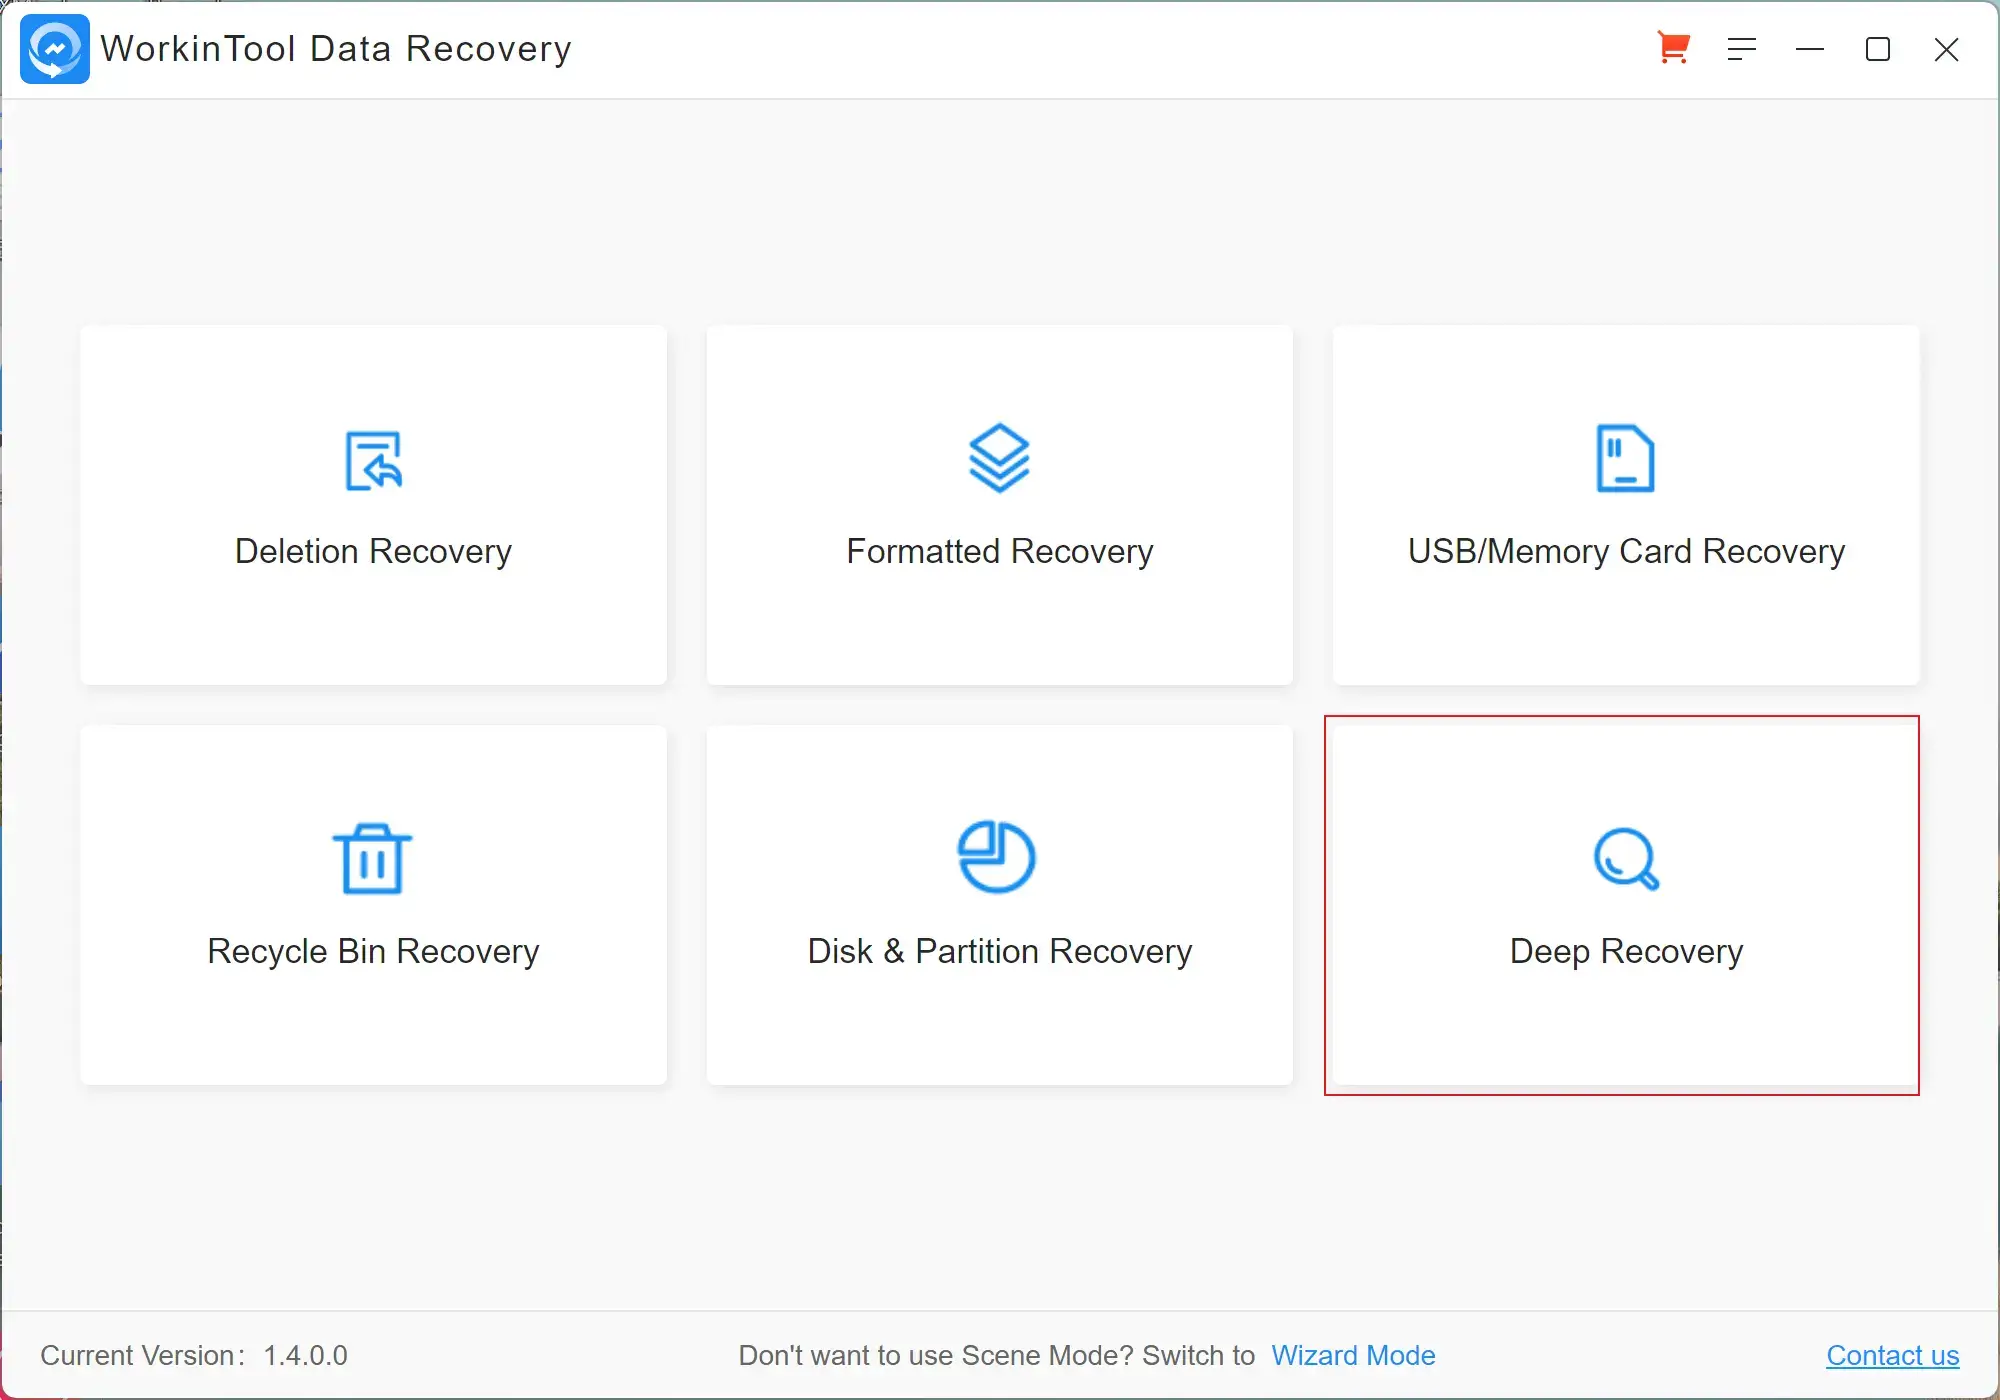 choose deep recovery in workintool data recovery